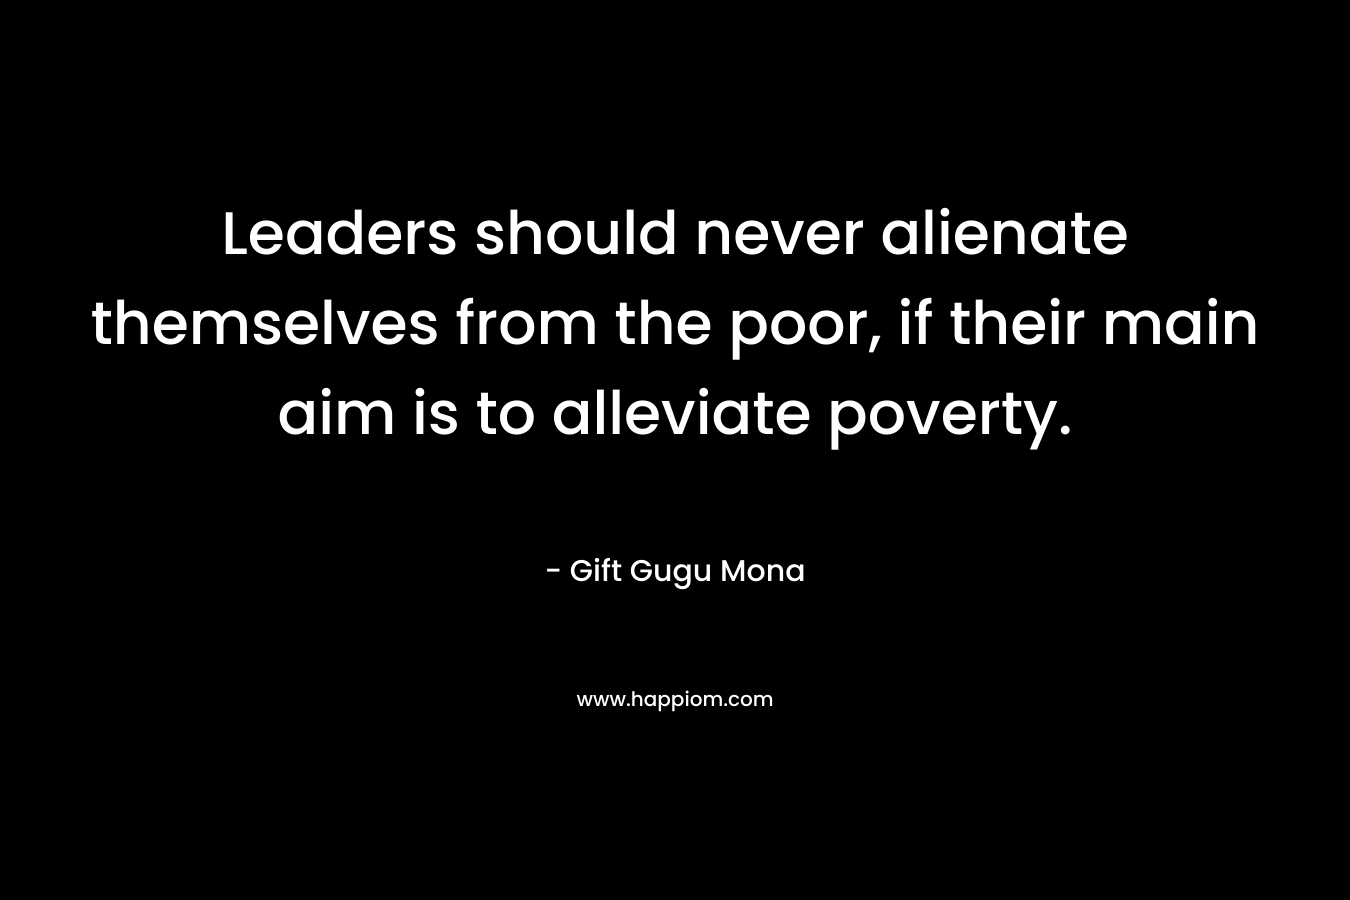 Leaders should never alienate themselves from the poor, if their main aim is to alleviate poverty.